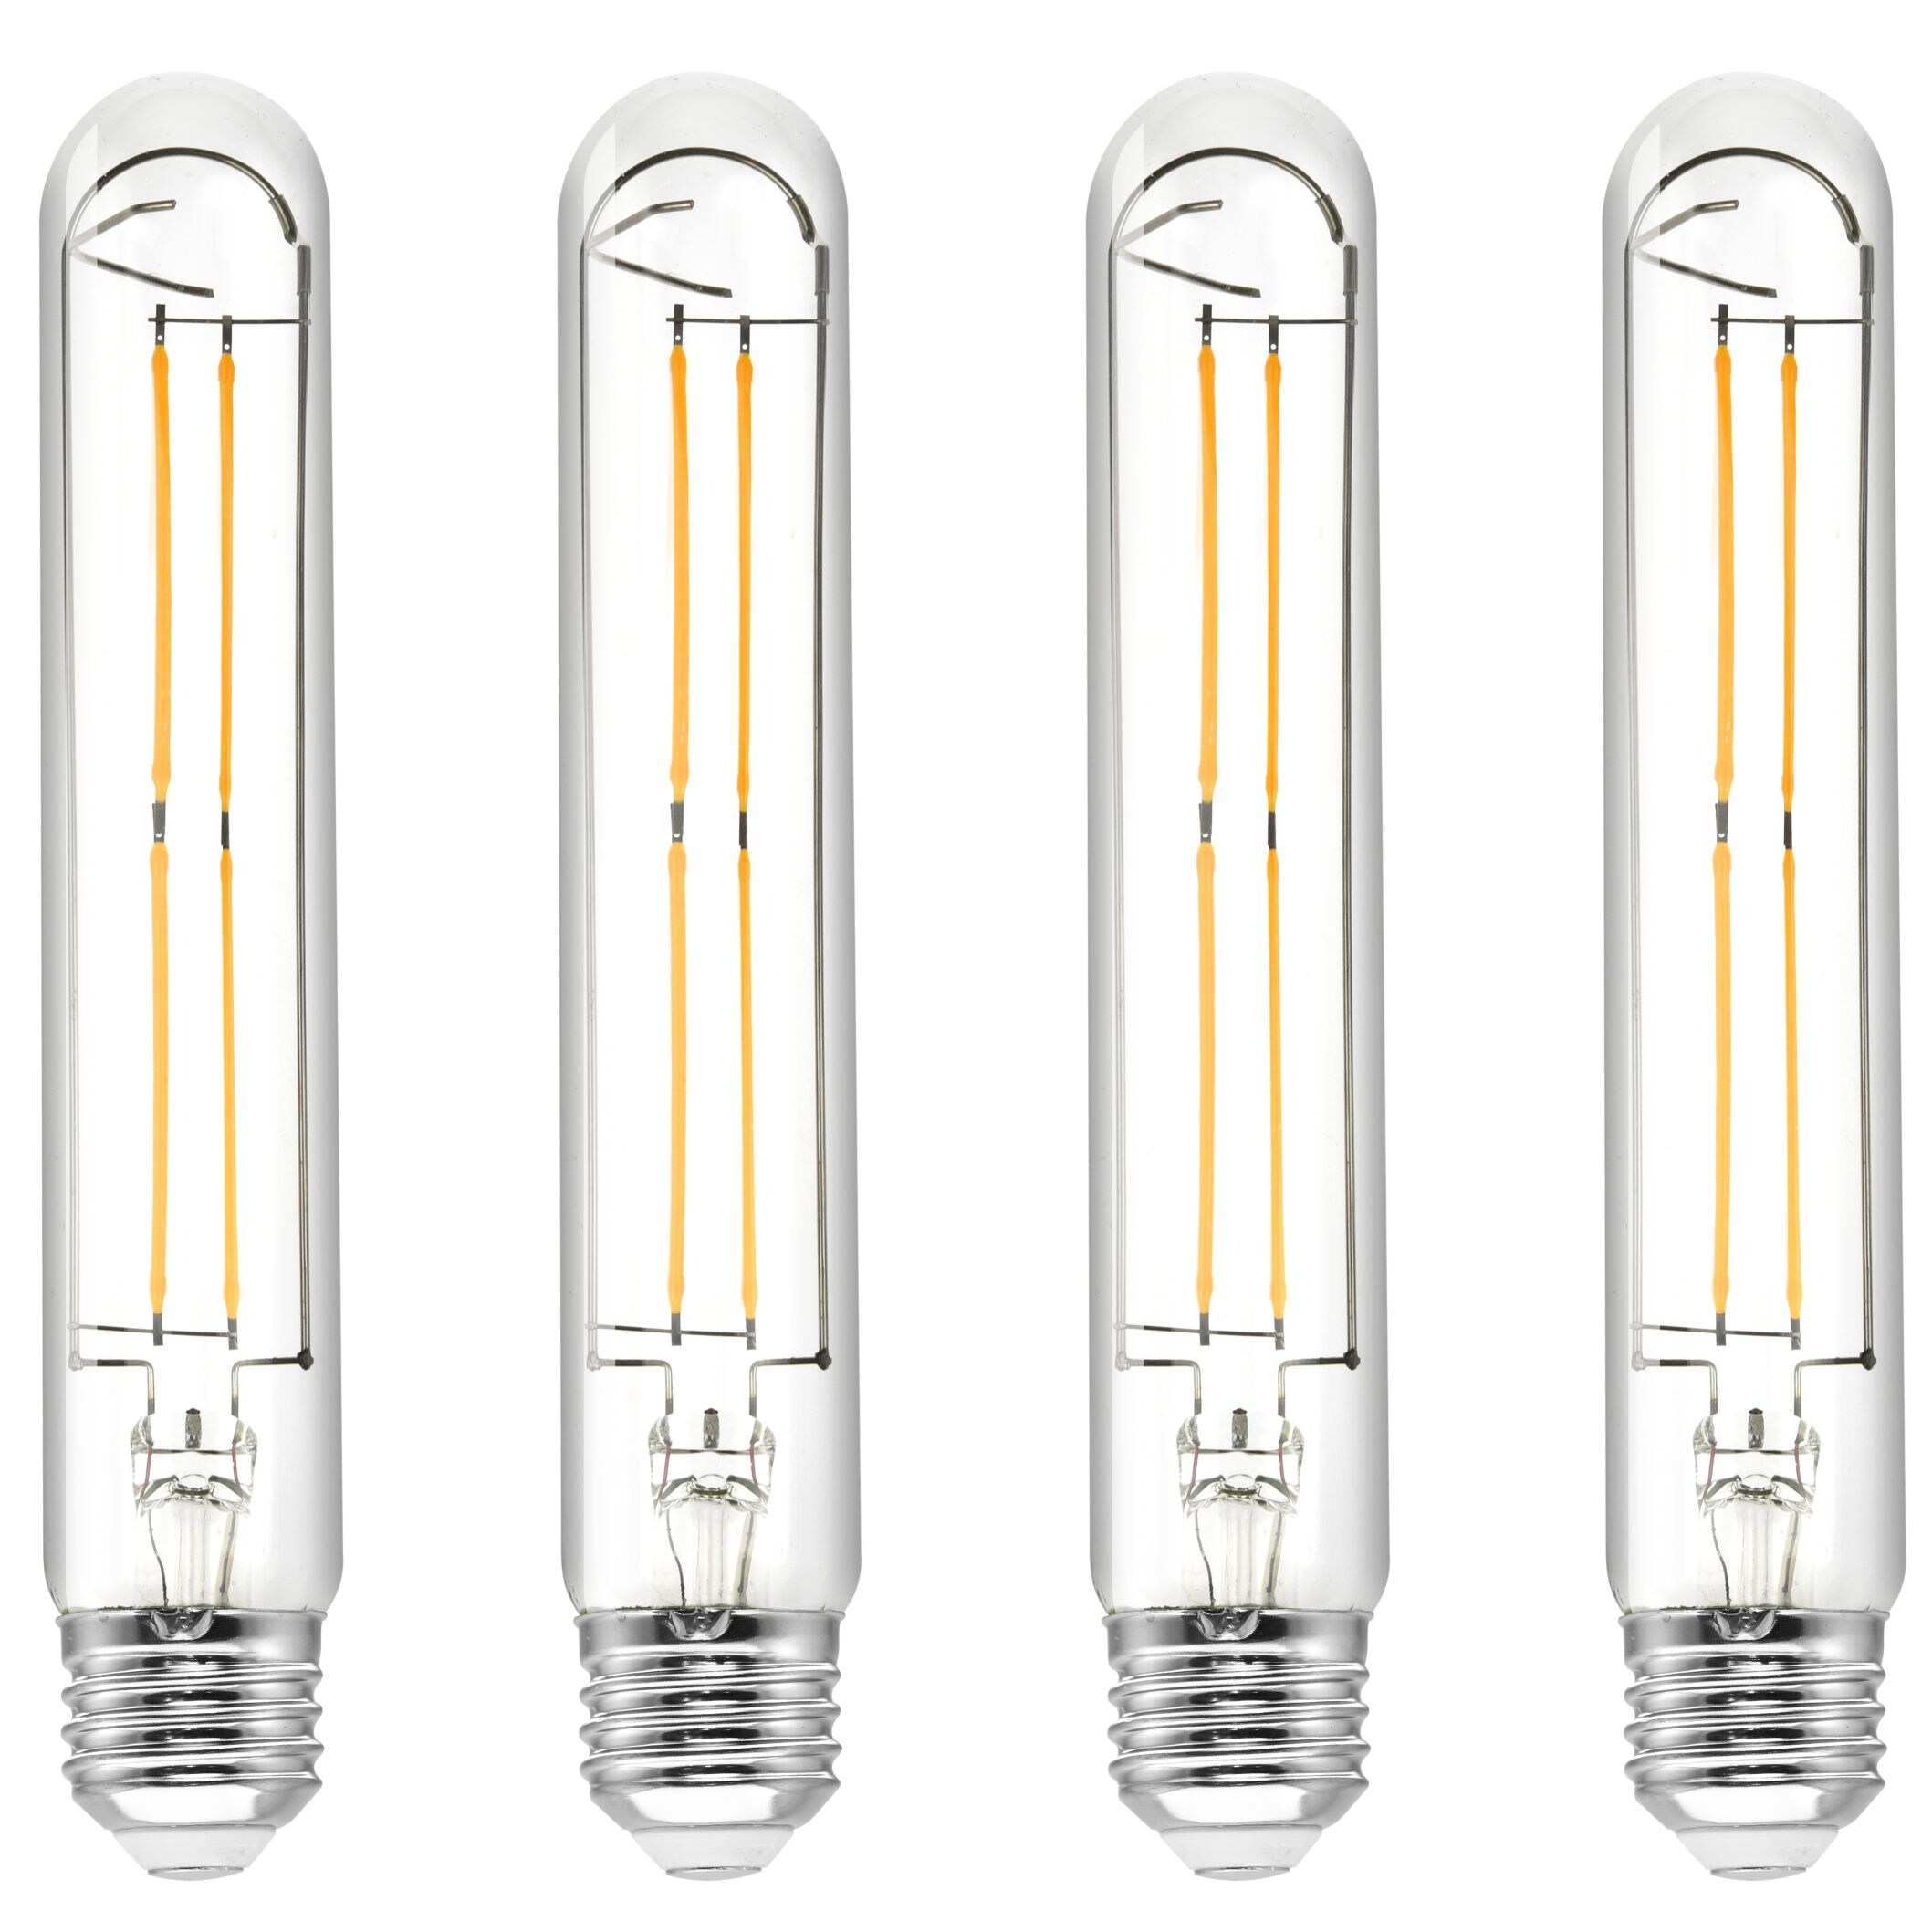 Replacement for Britek Lv100 Light Bulb by Technical Precision 